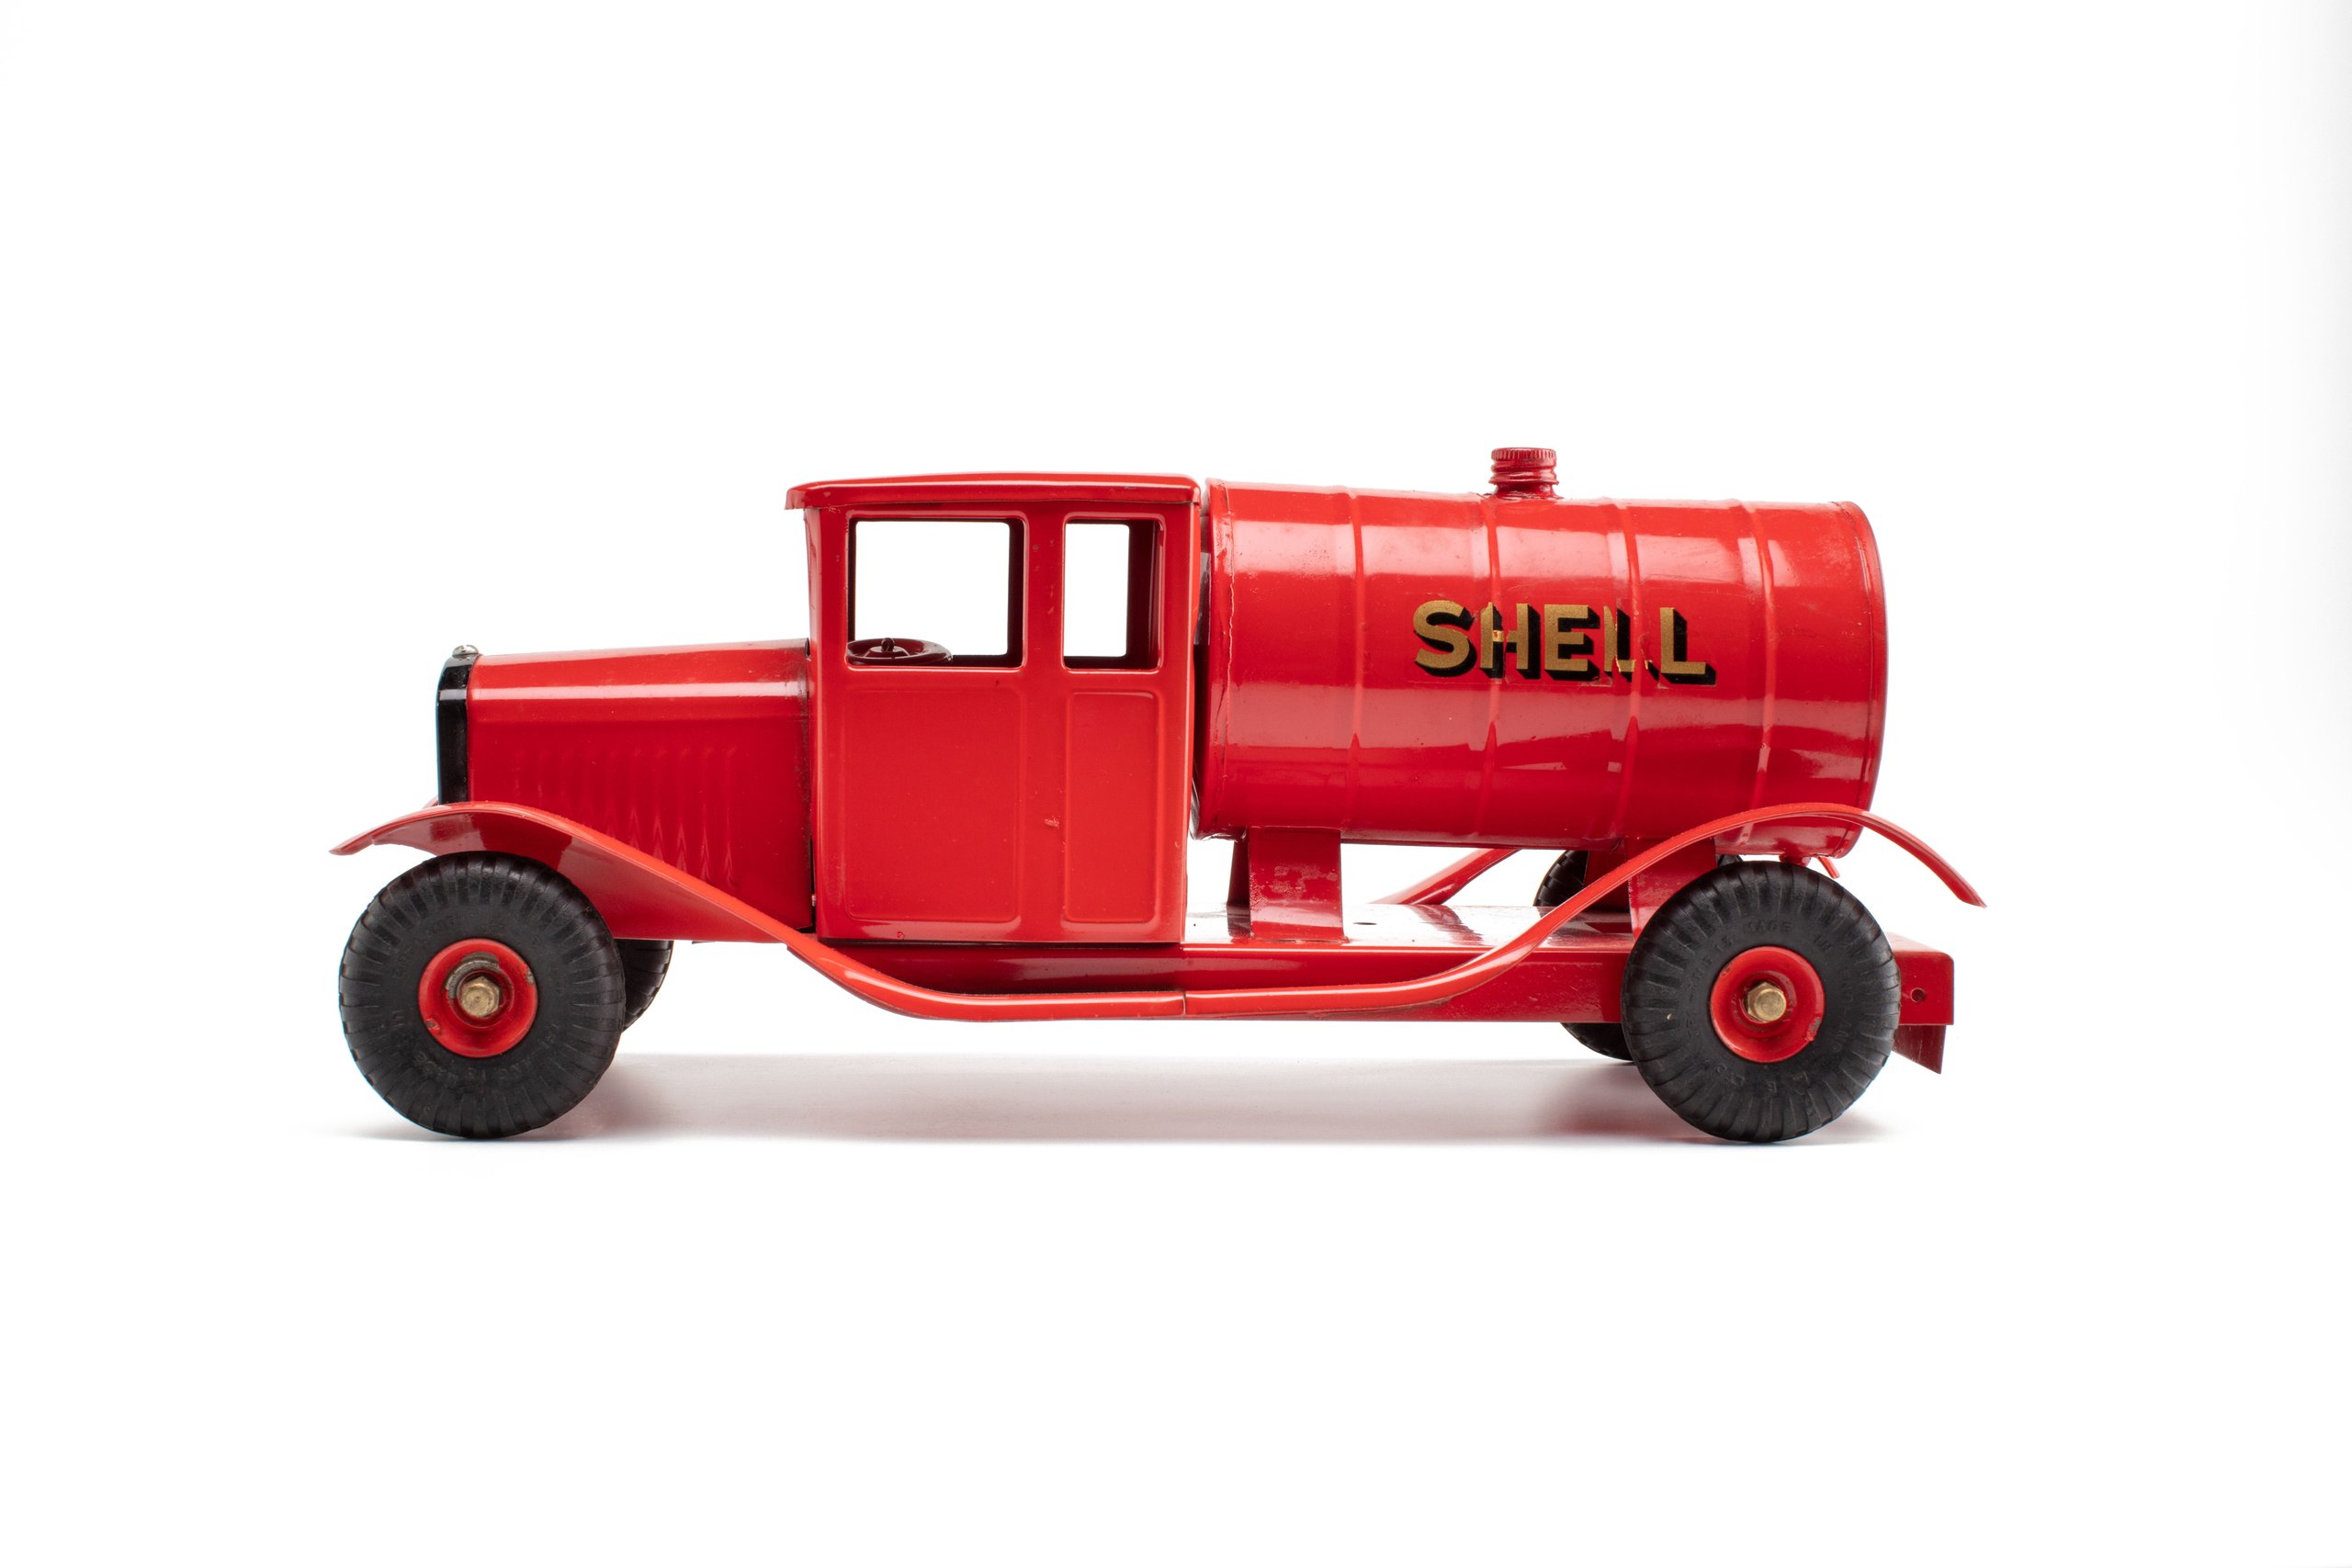 Toy petrol tanker made by Lines Bros